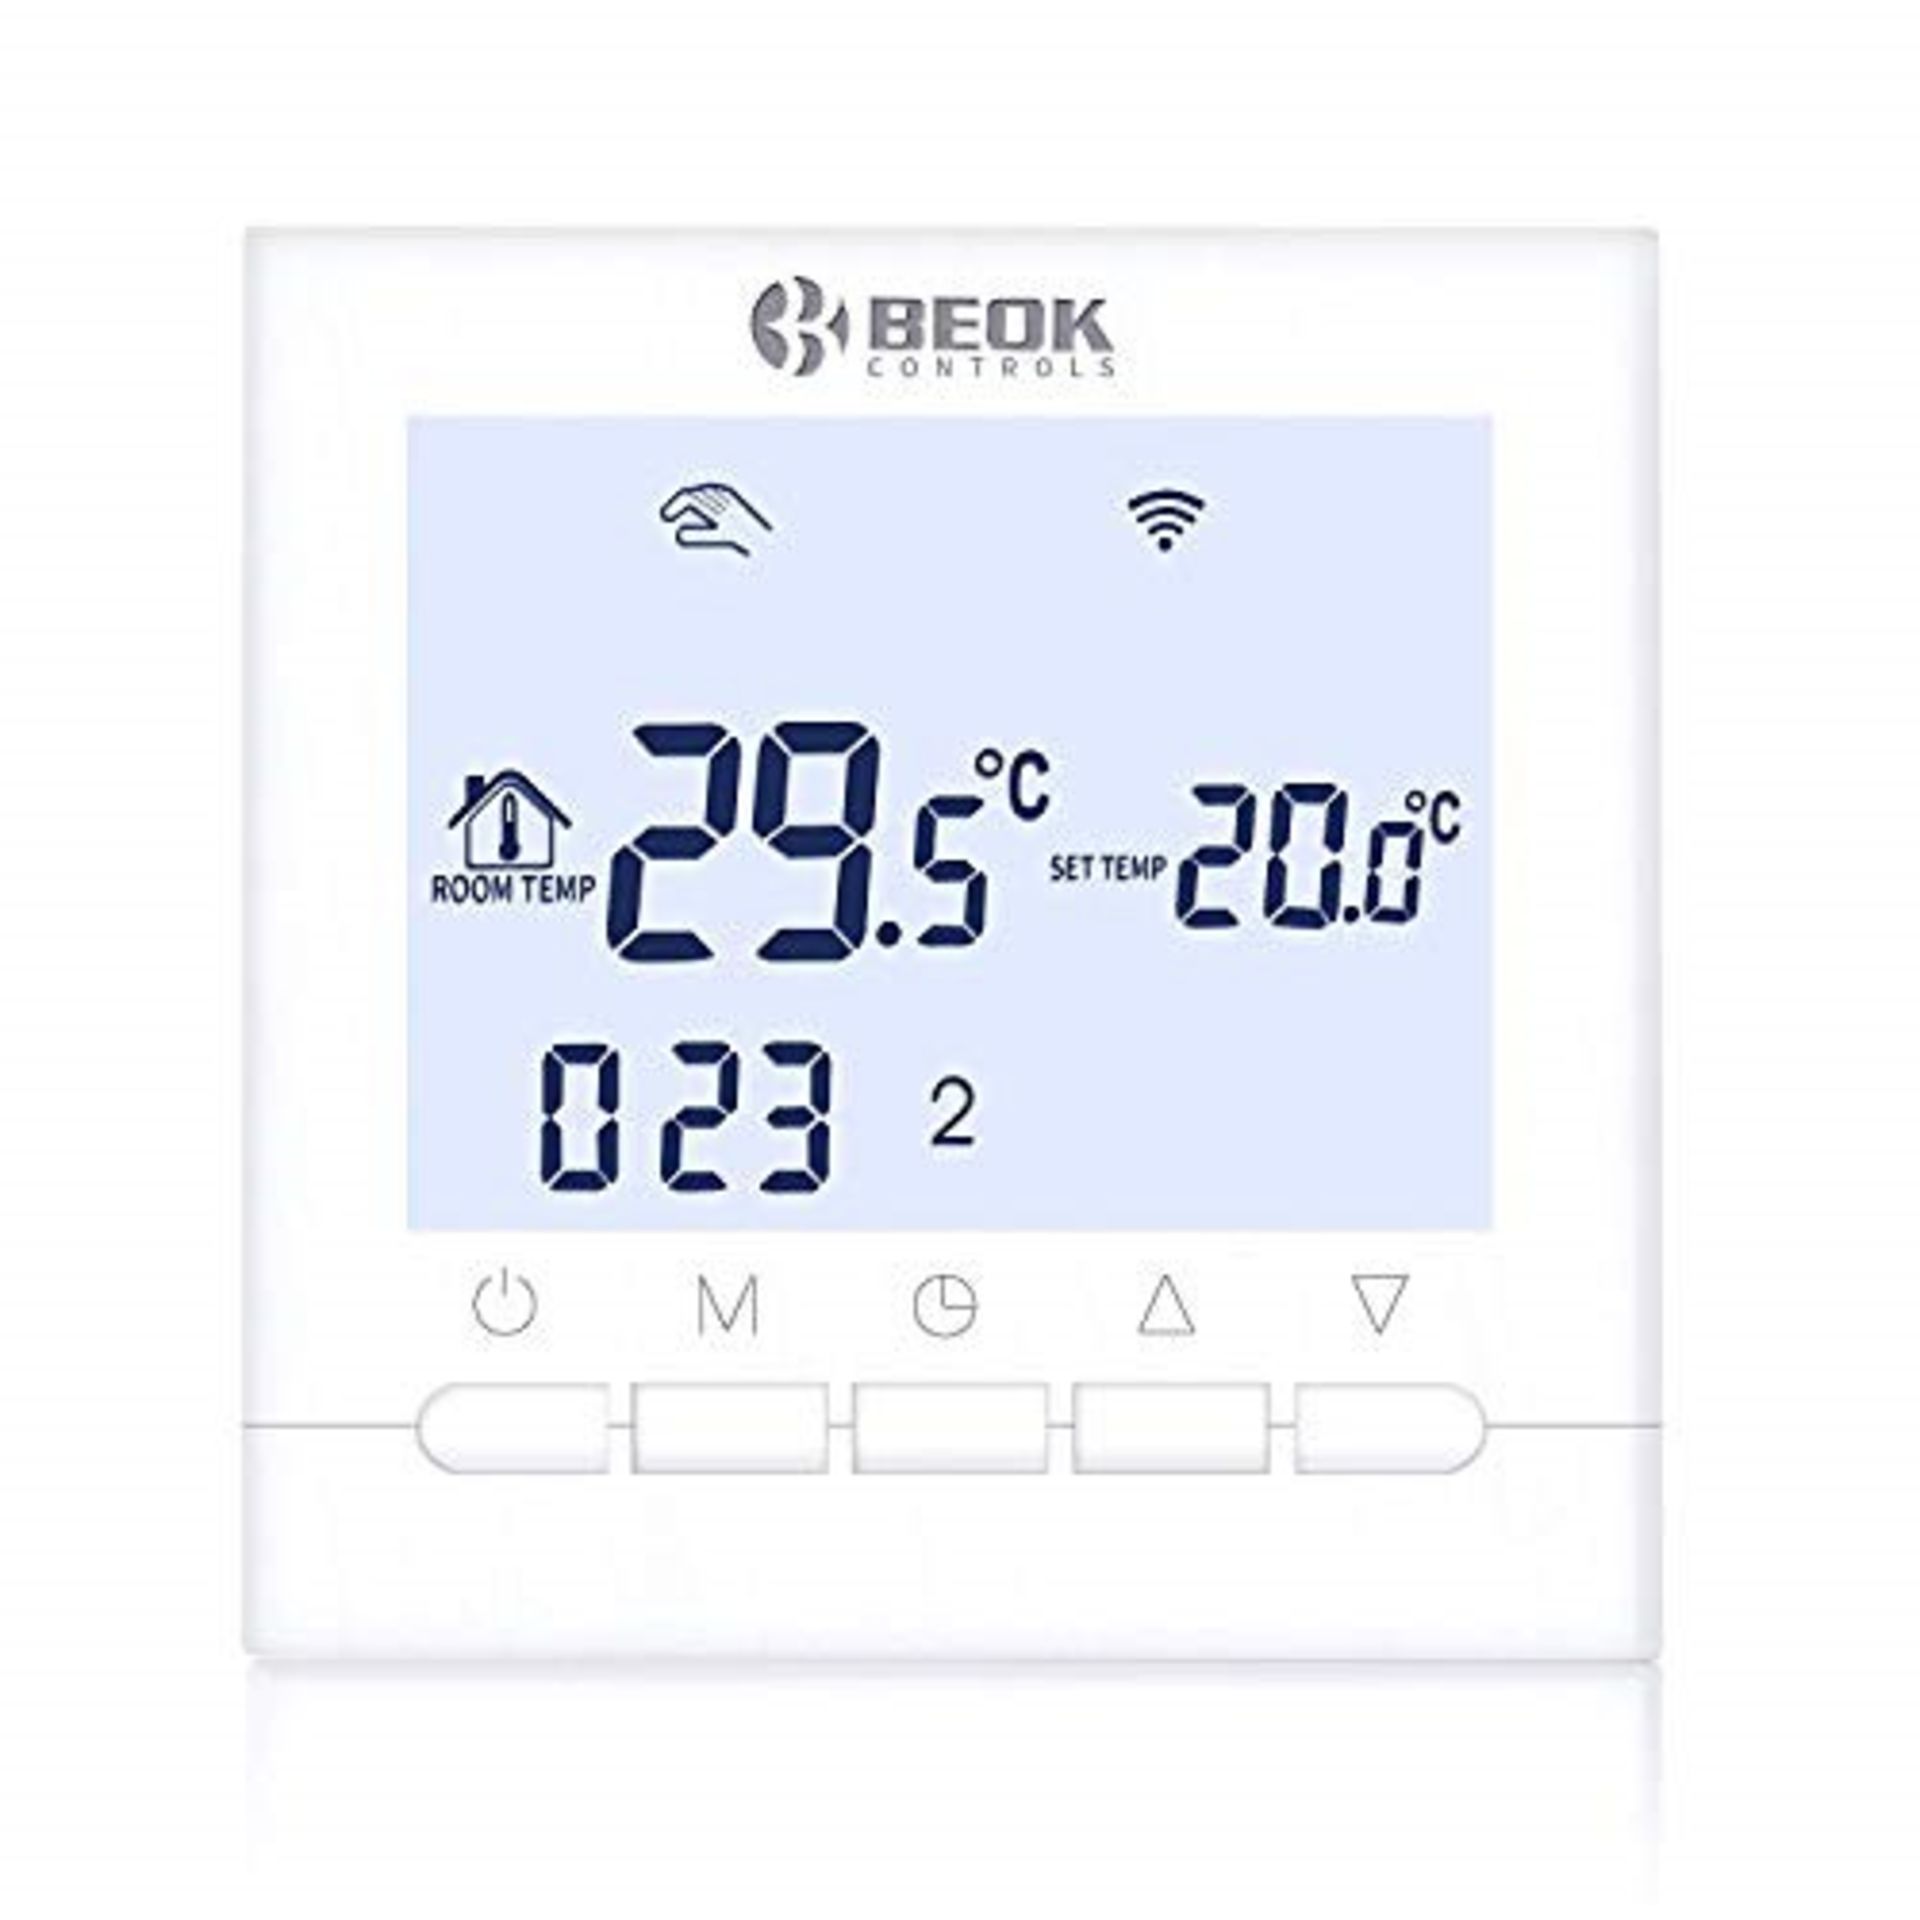 Beok BOT-313 WiFi Progammable Gas Boiler Thermostat, Easy to Program LCD Touchscreen W